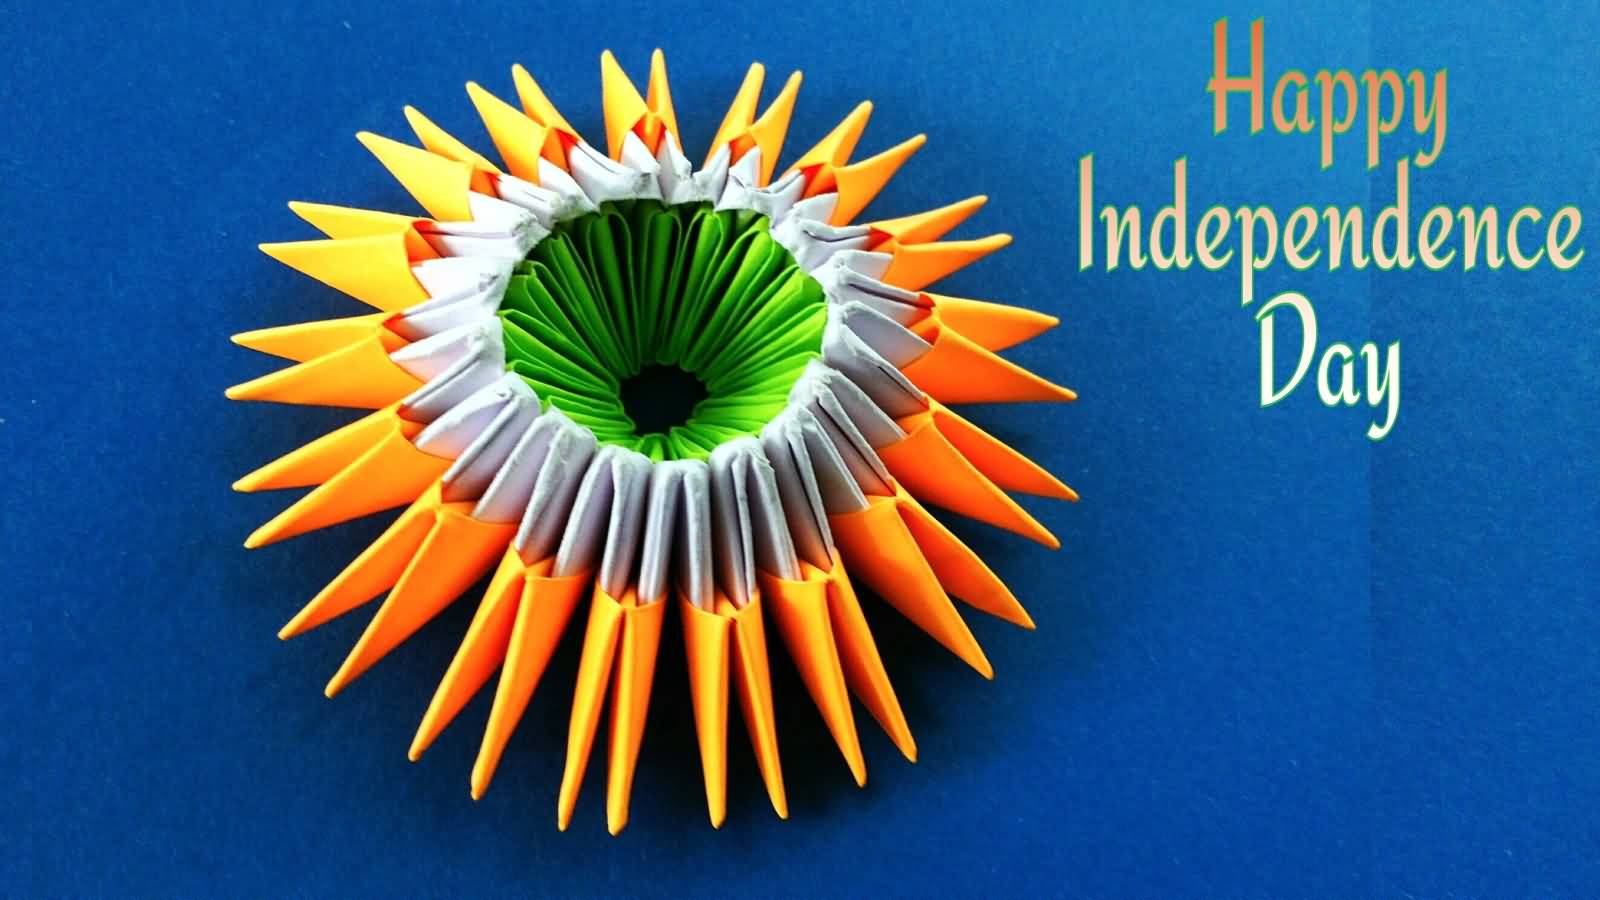 Happy Independence Day Hd Wallpapers - Special Indian Independence Day - HD Wallpaper 